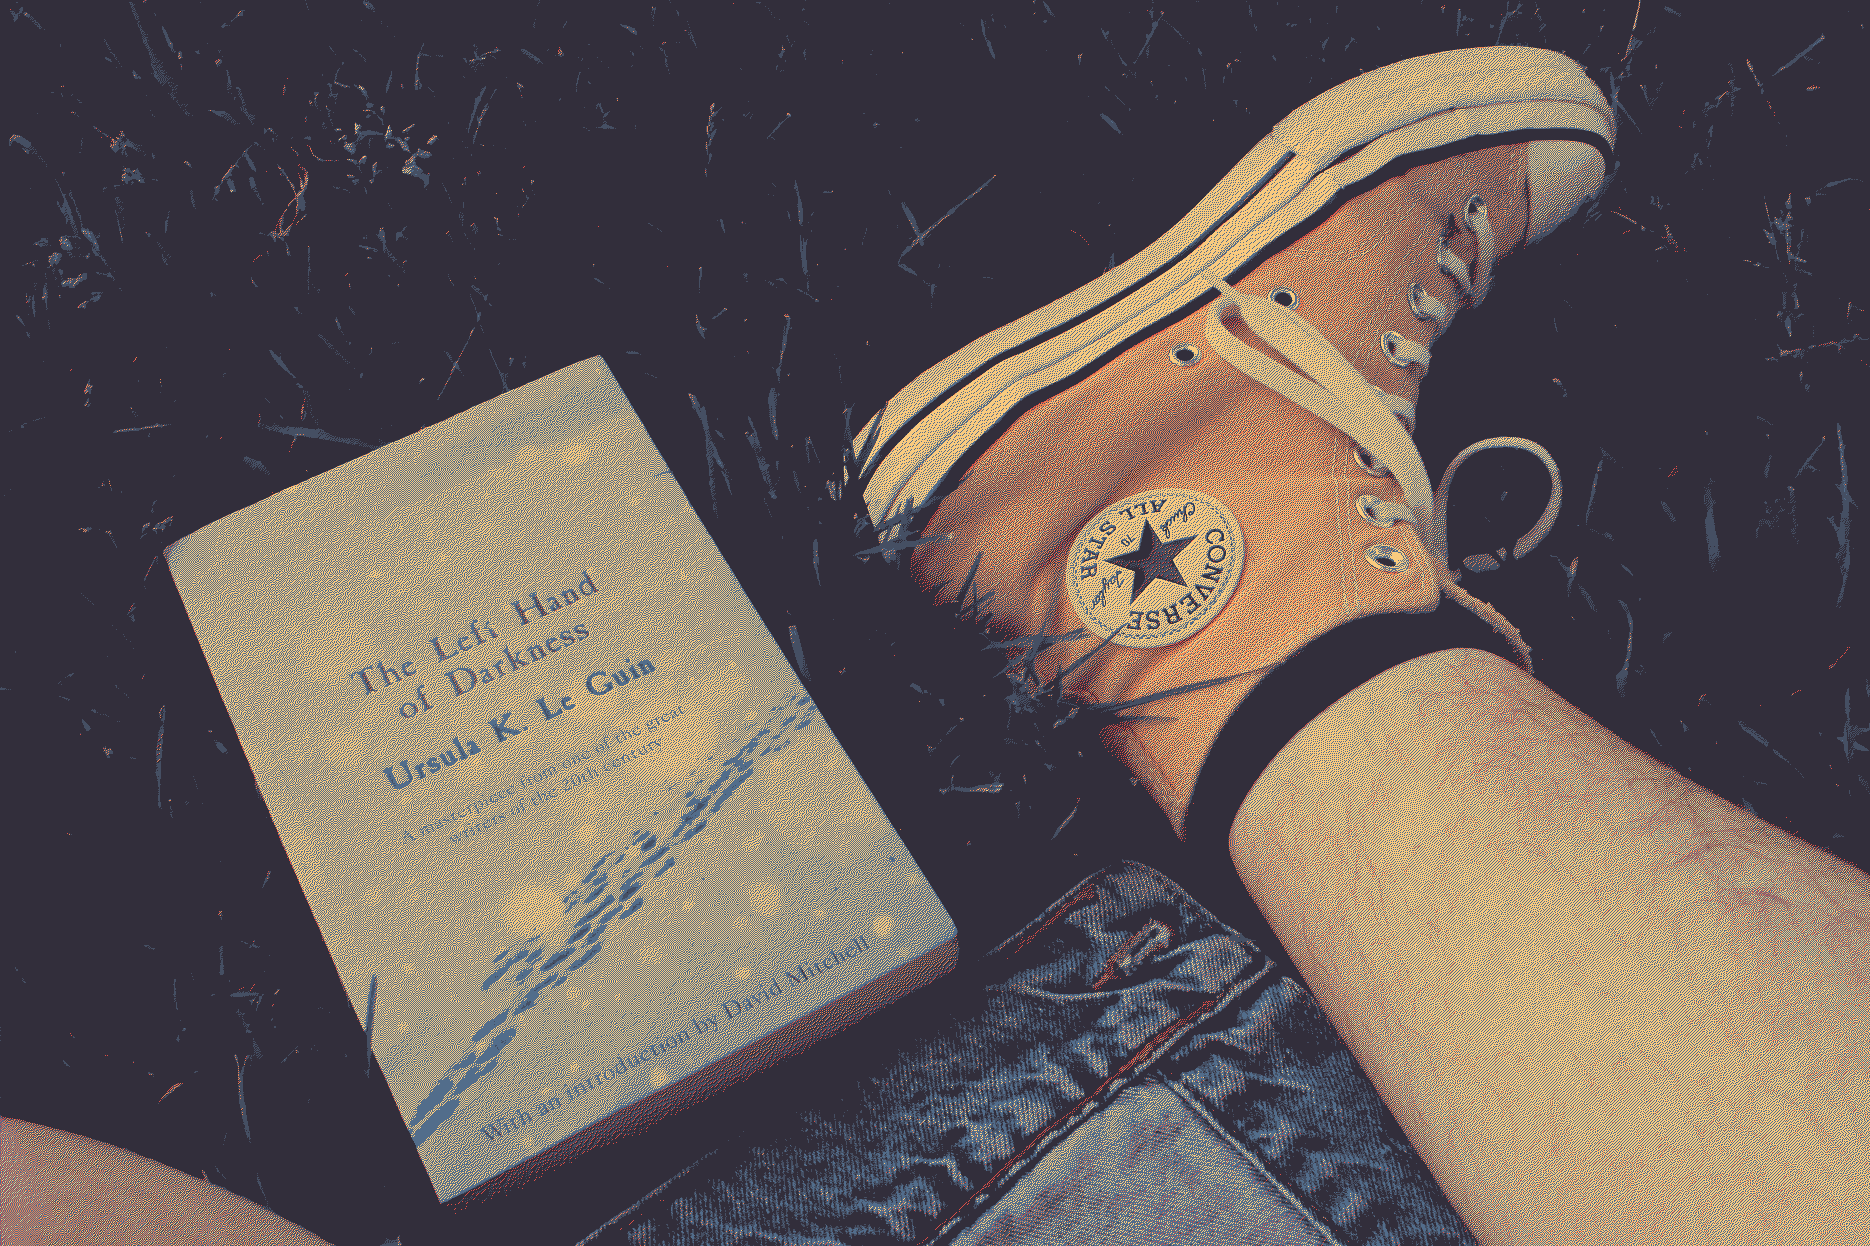 A photo of the book I was reading while at the park, The Left Hand of Darkness by Ursula Le Guin, and my foot wearing a yellow converse shoe next to it.